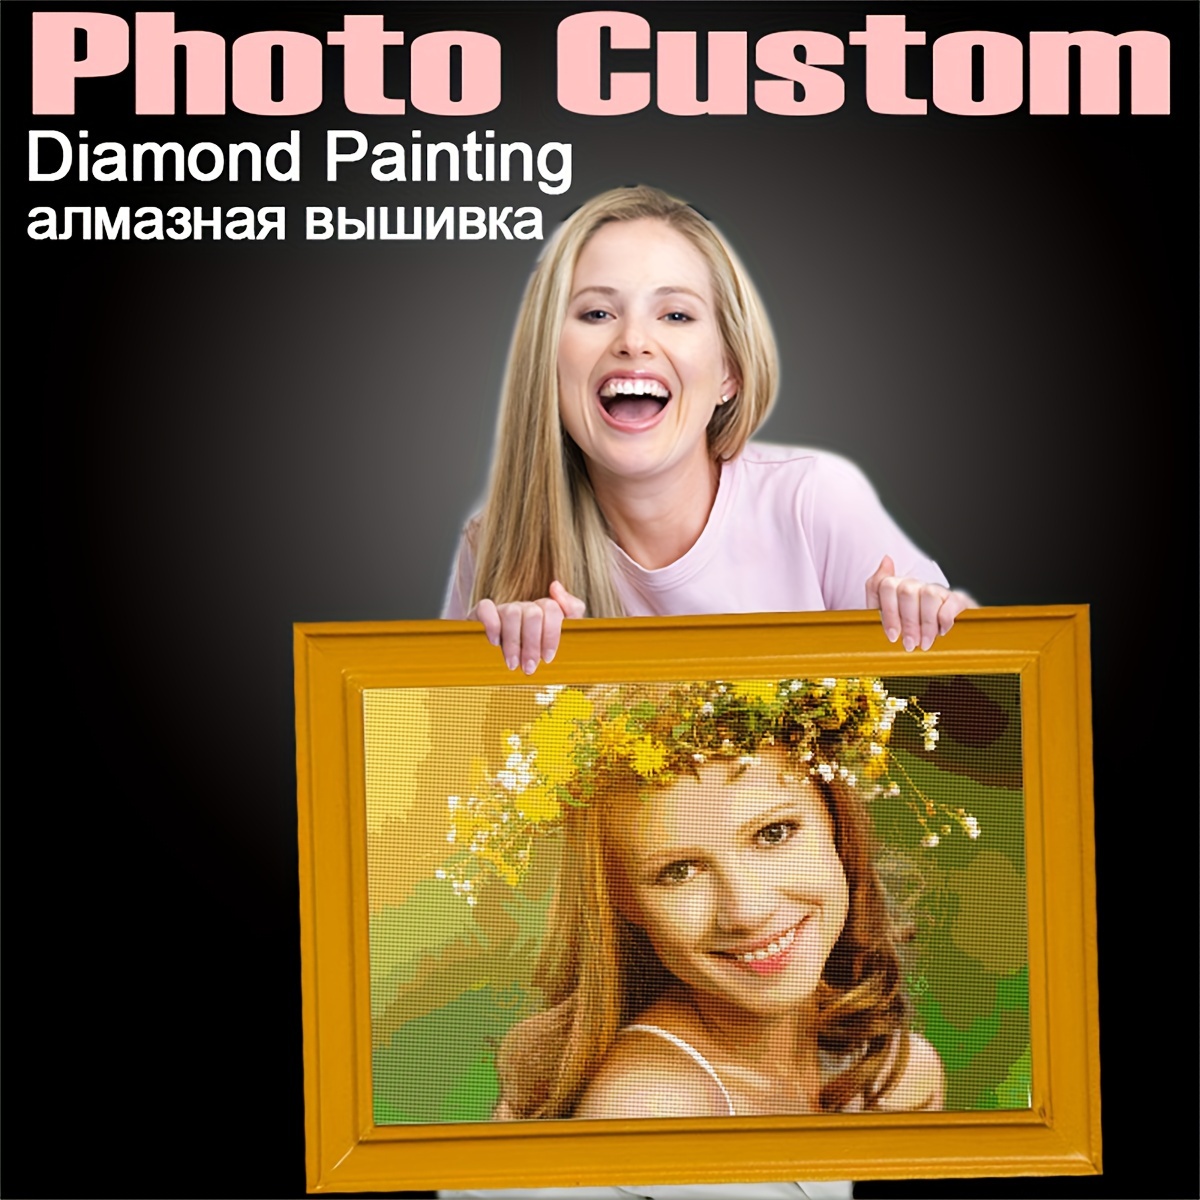 

Customize A 40*60cm/15.7*23.6in Personalized 5d Diy Diamond Art Painting, Customize A Digital Painting Kit, Customize A Home Decor Diamond Art, A Unique Gift With Your Own Photo, Round Diamond.